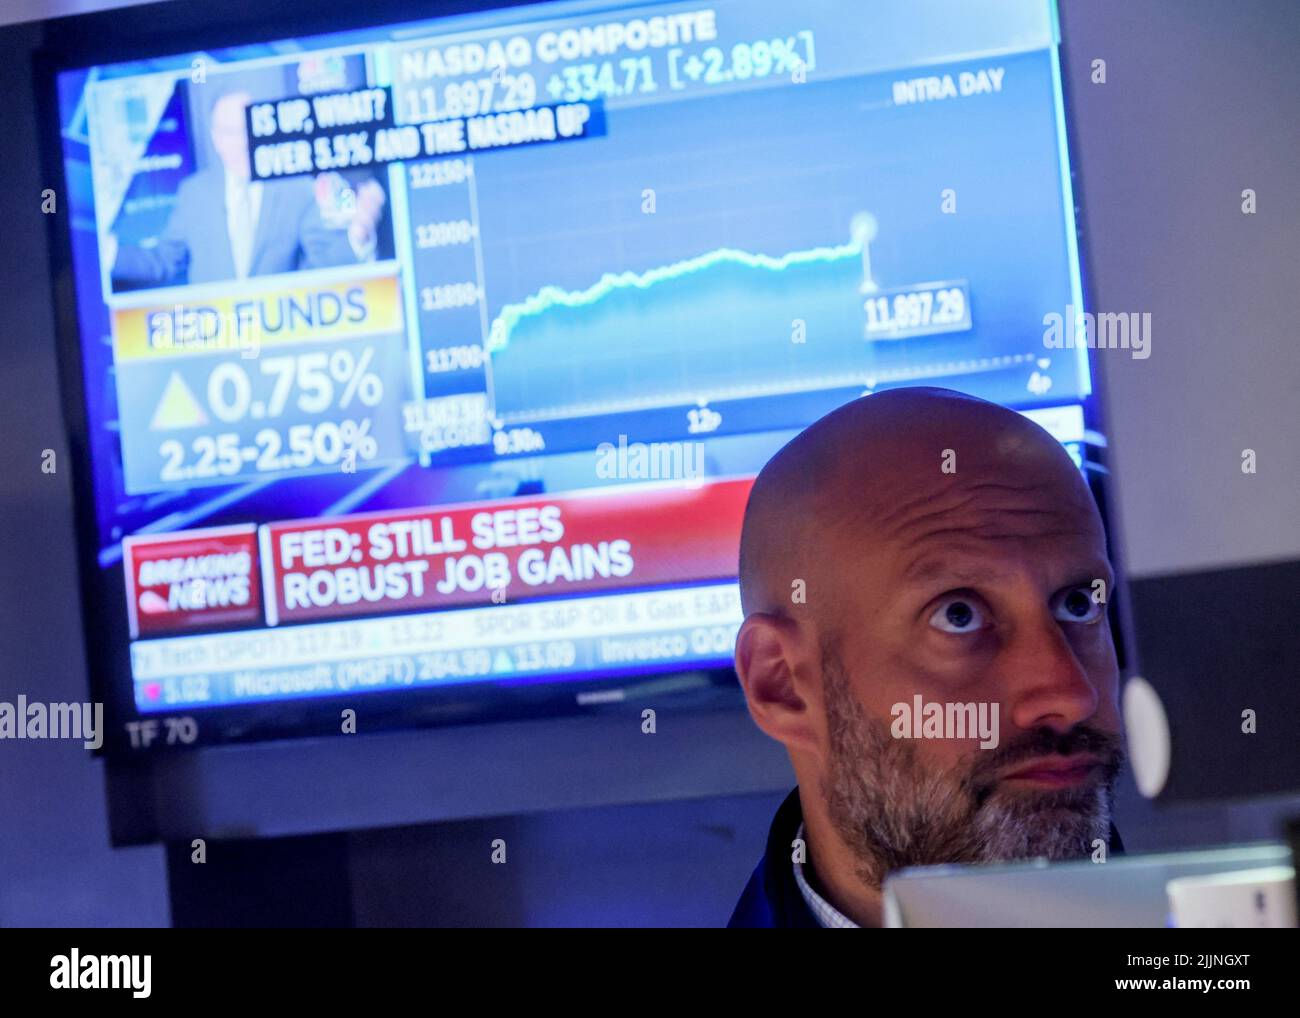 A screen displays the Fed rate announcement as a trader reacts on the floor of the New York Stock Exchange (NYSE) in New York City, U.S., July 27, 2022. REUTERS/Brendan McDermid Stock Photo